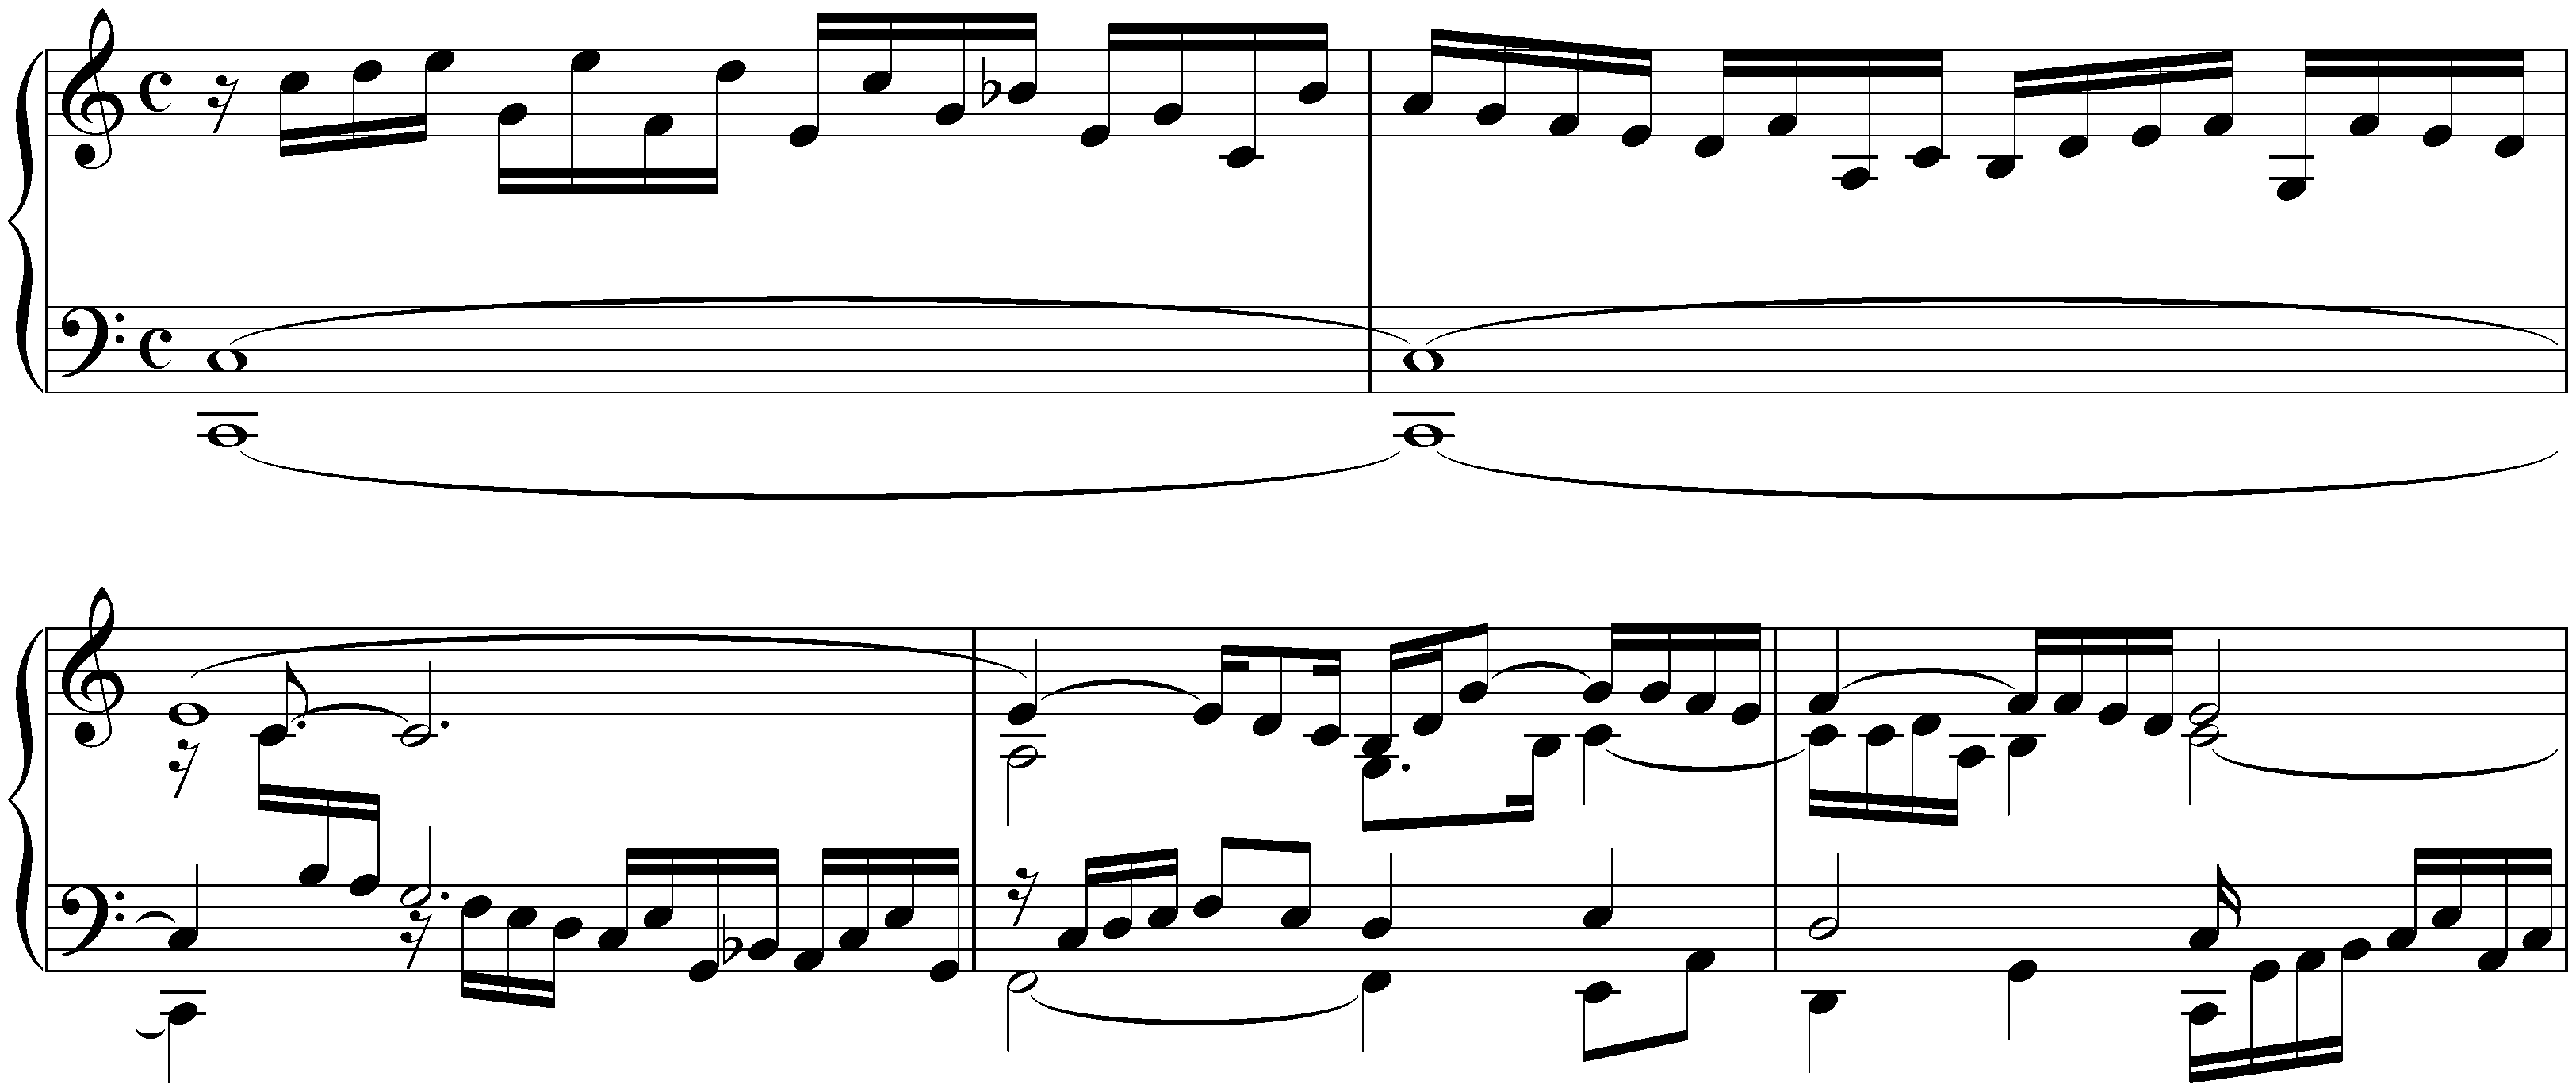 The Well-Tempered Clavier, Book 2, BWV 870–893; 1. C major, BWV 870, Prelude (first final version)